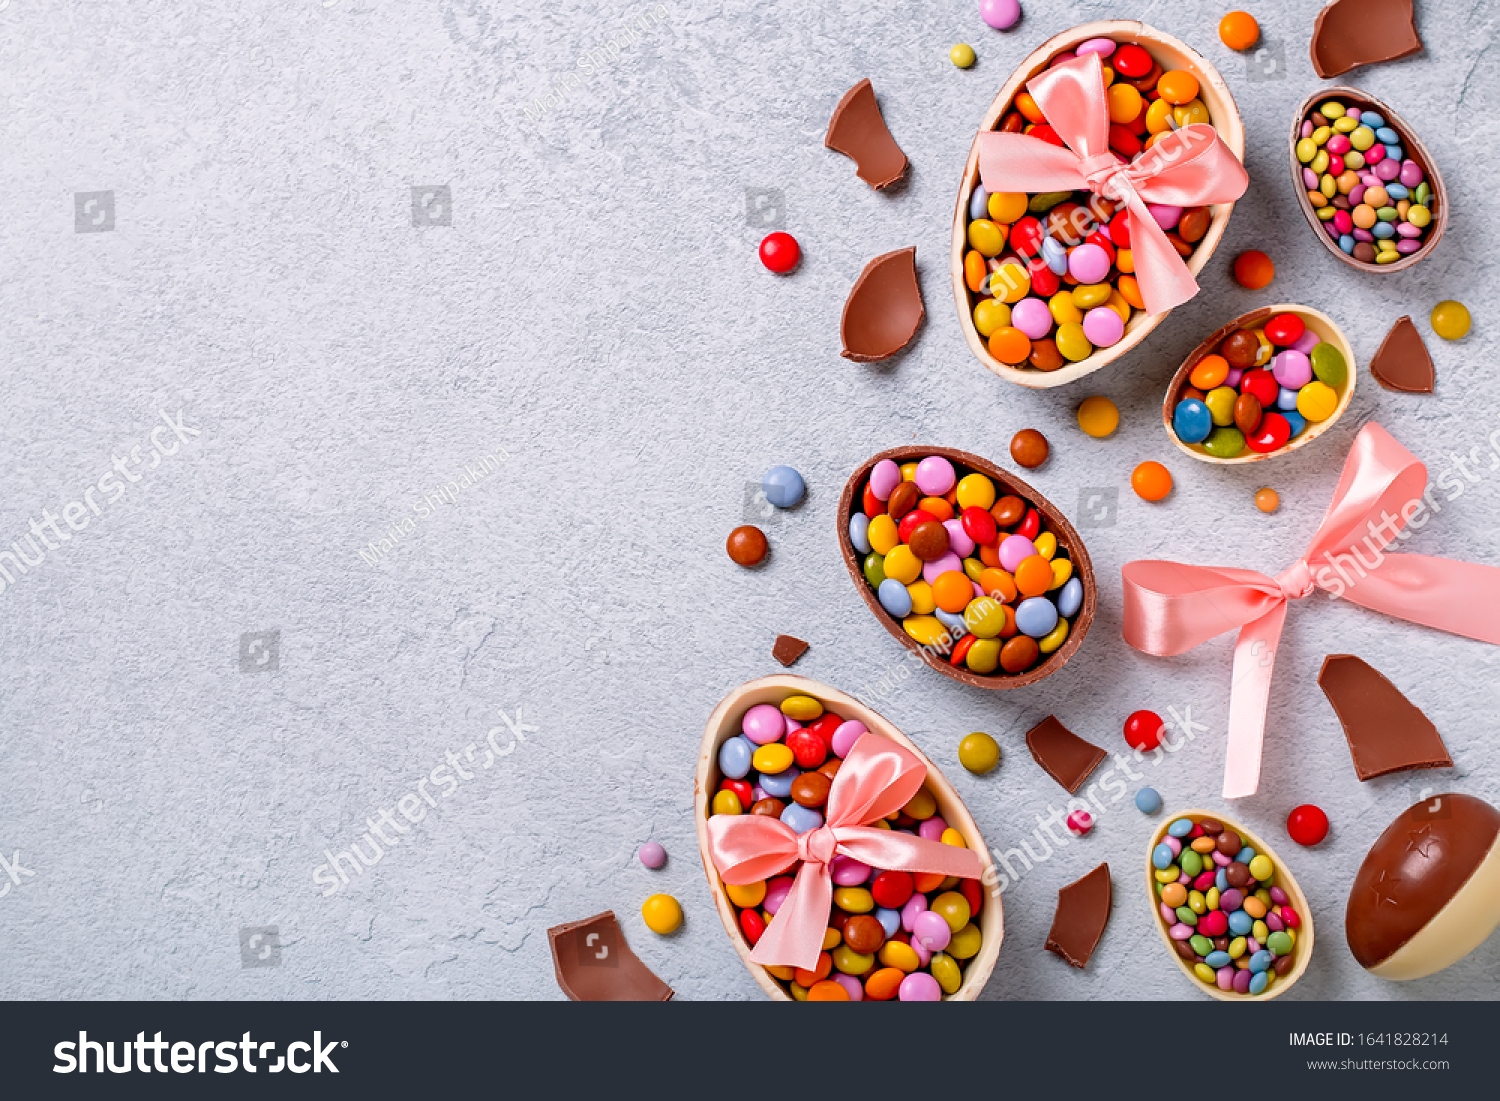 Chocolate Easter eggs and candy on concrete table, festive Easter background flat lay, copy space. Easter card with traditional treats on grey table top. Sweet Easter concept #1641828214